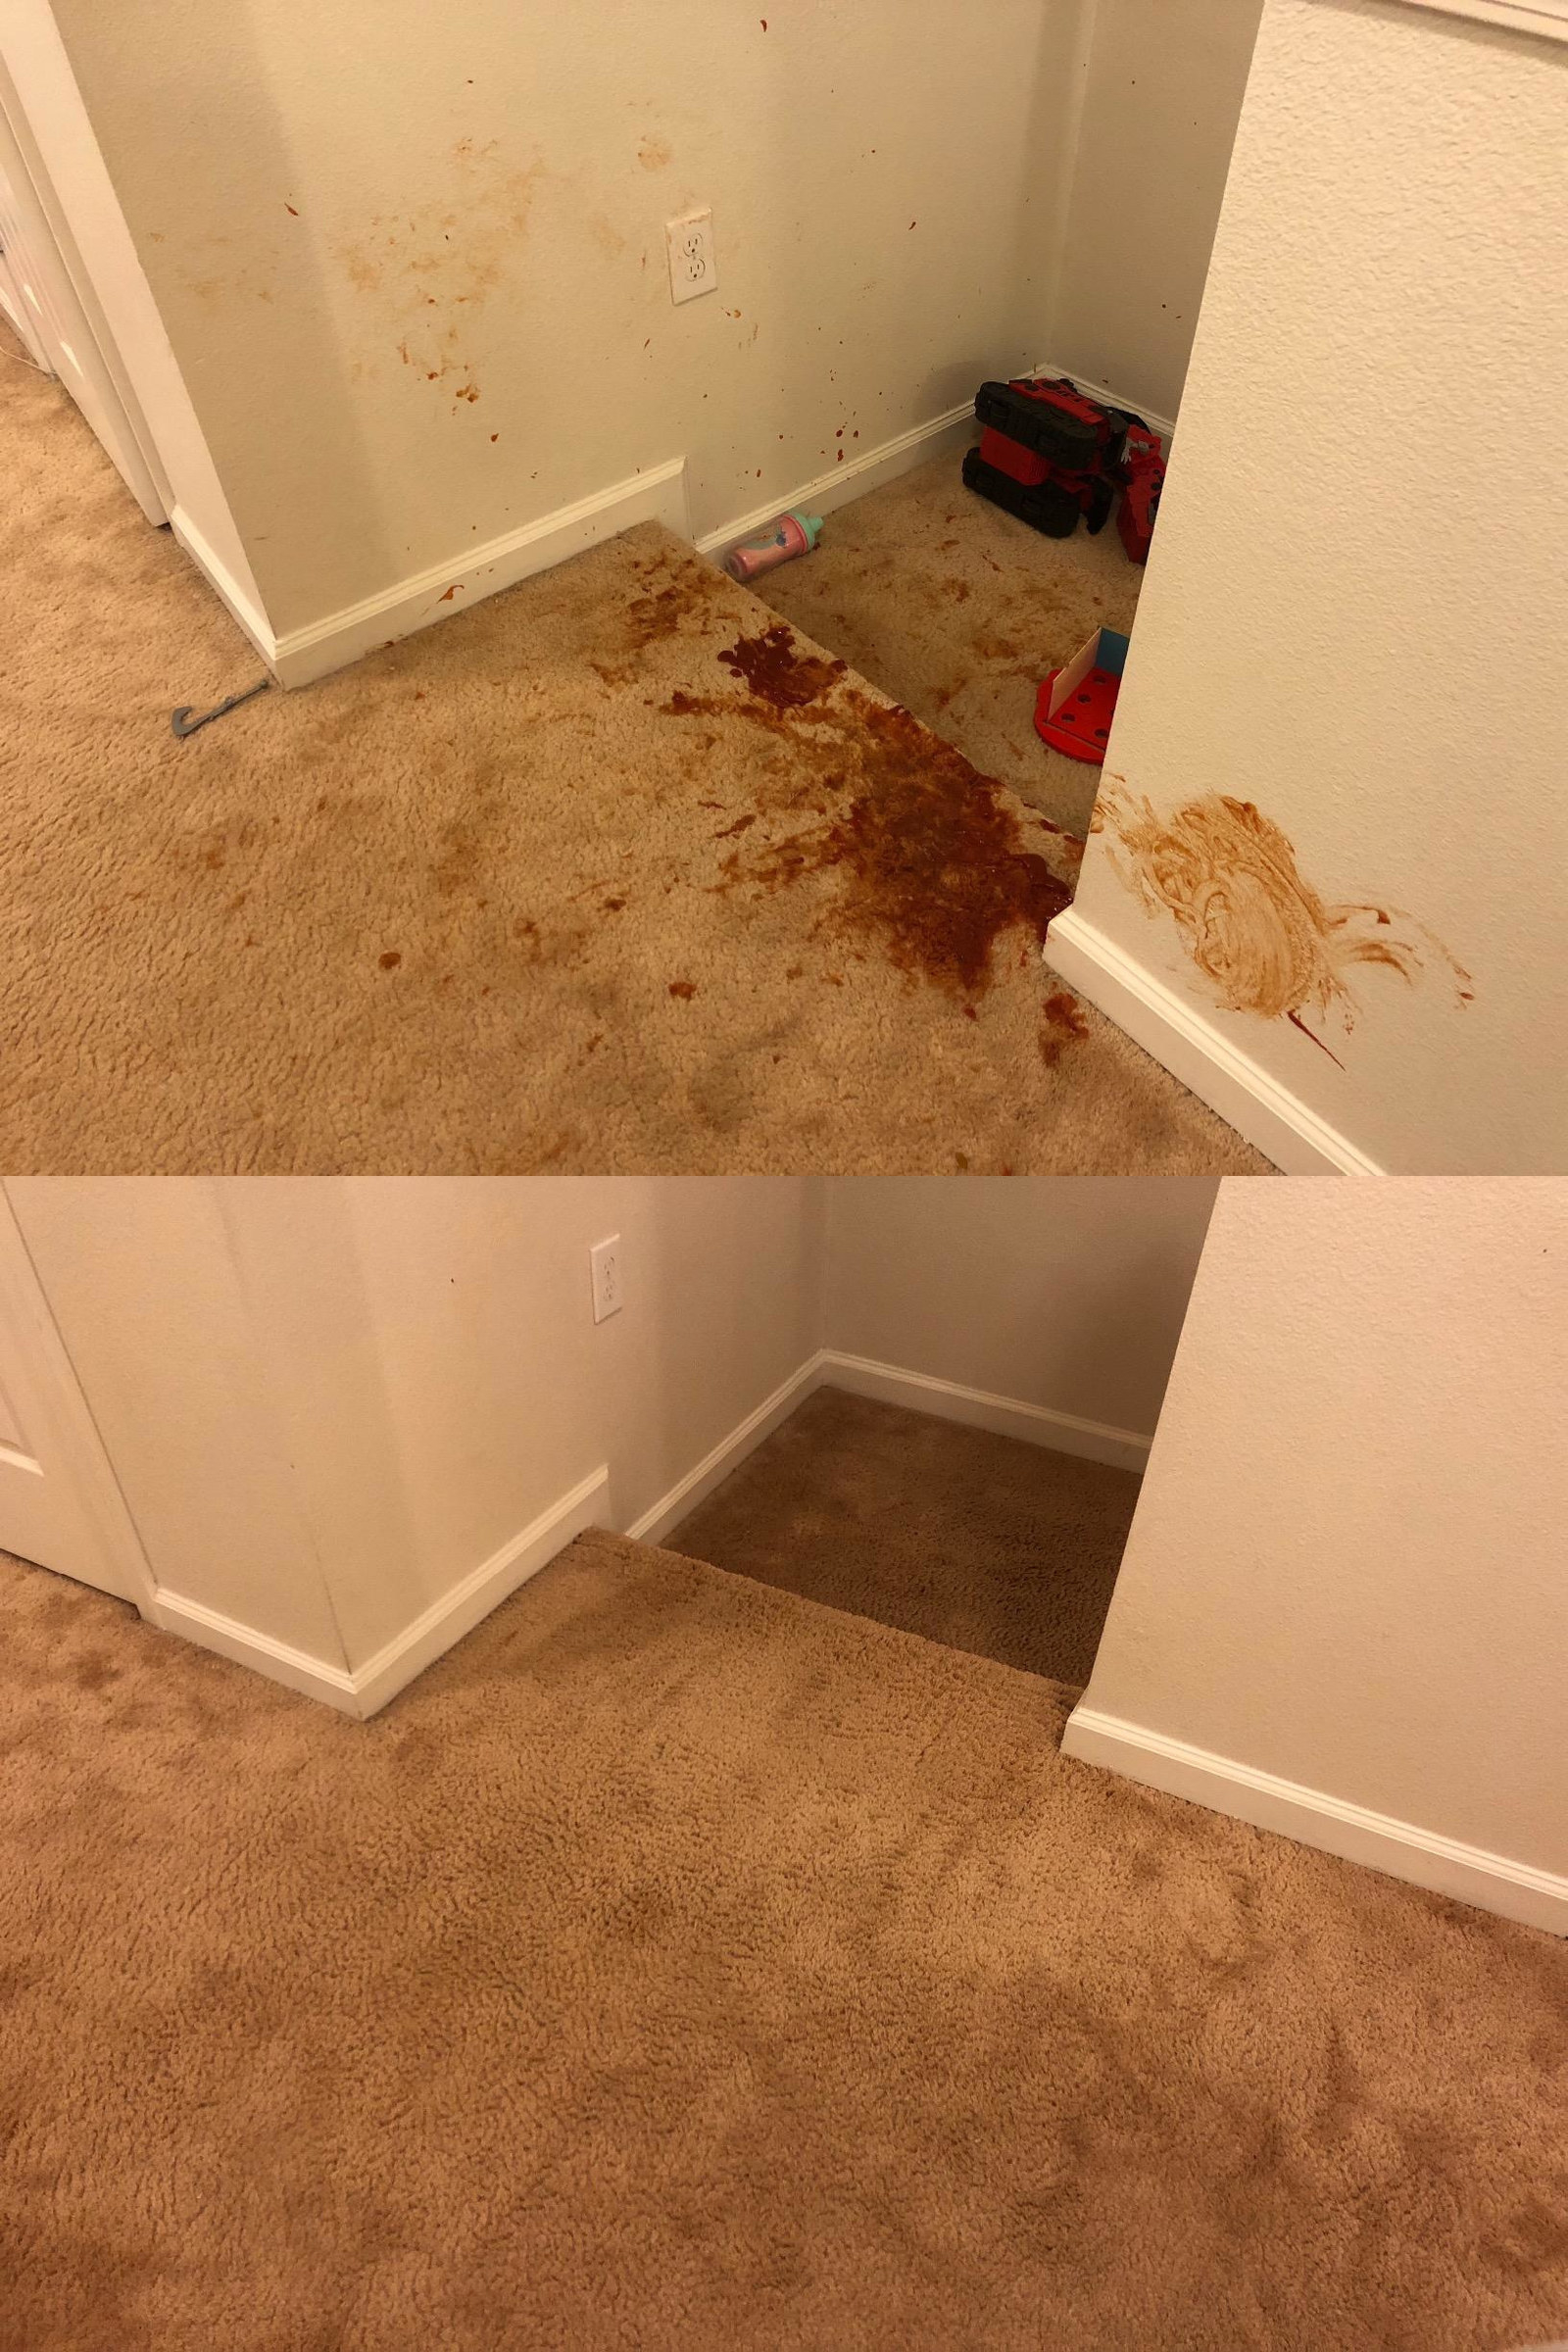 reviewer's stairs with red food stains completely removed from a carpet and walls